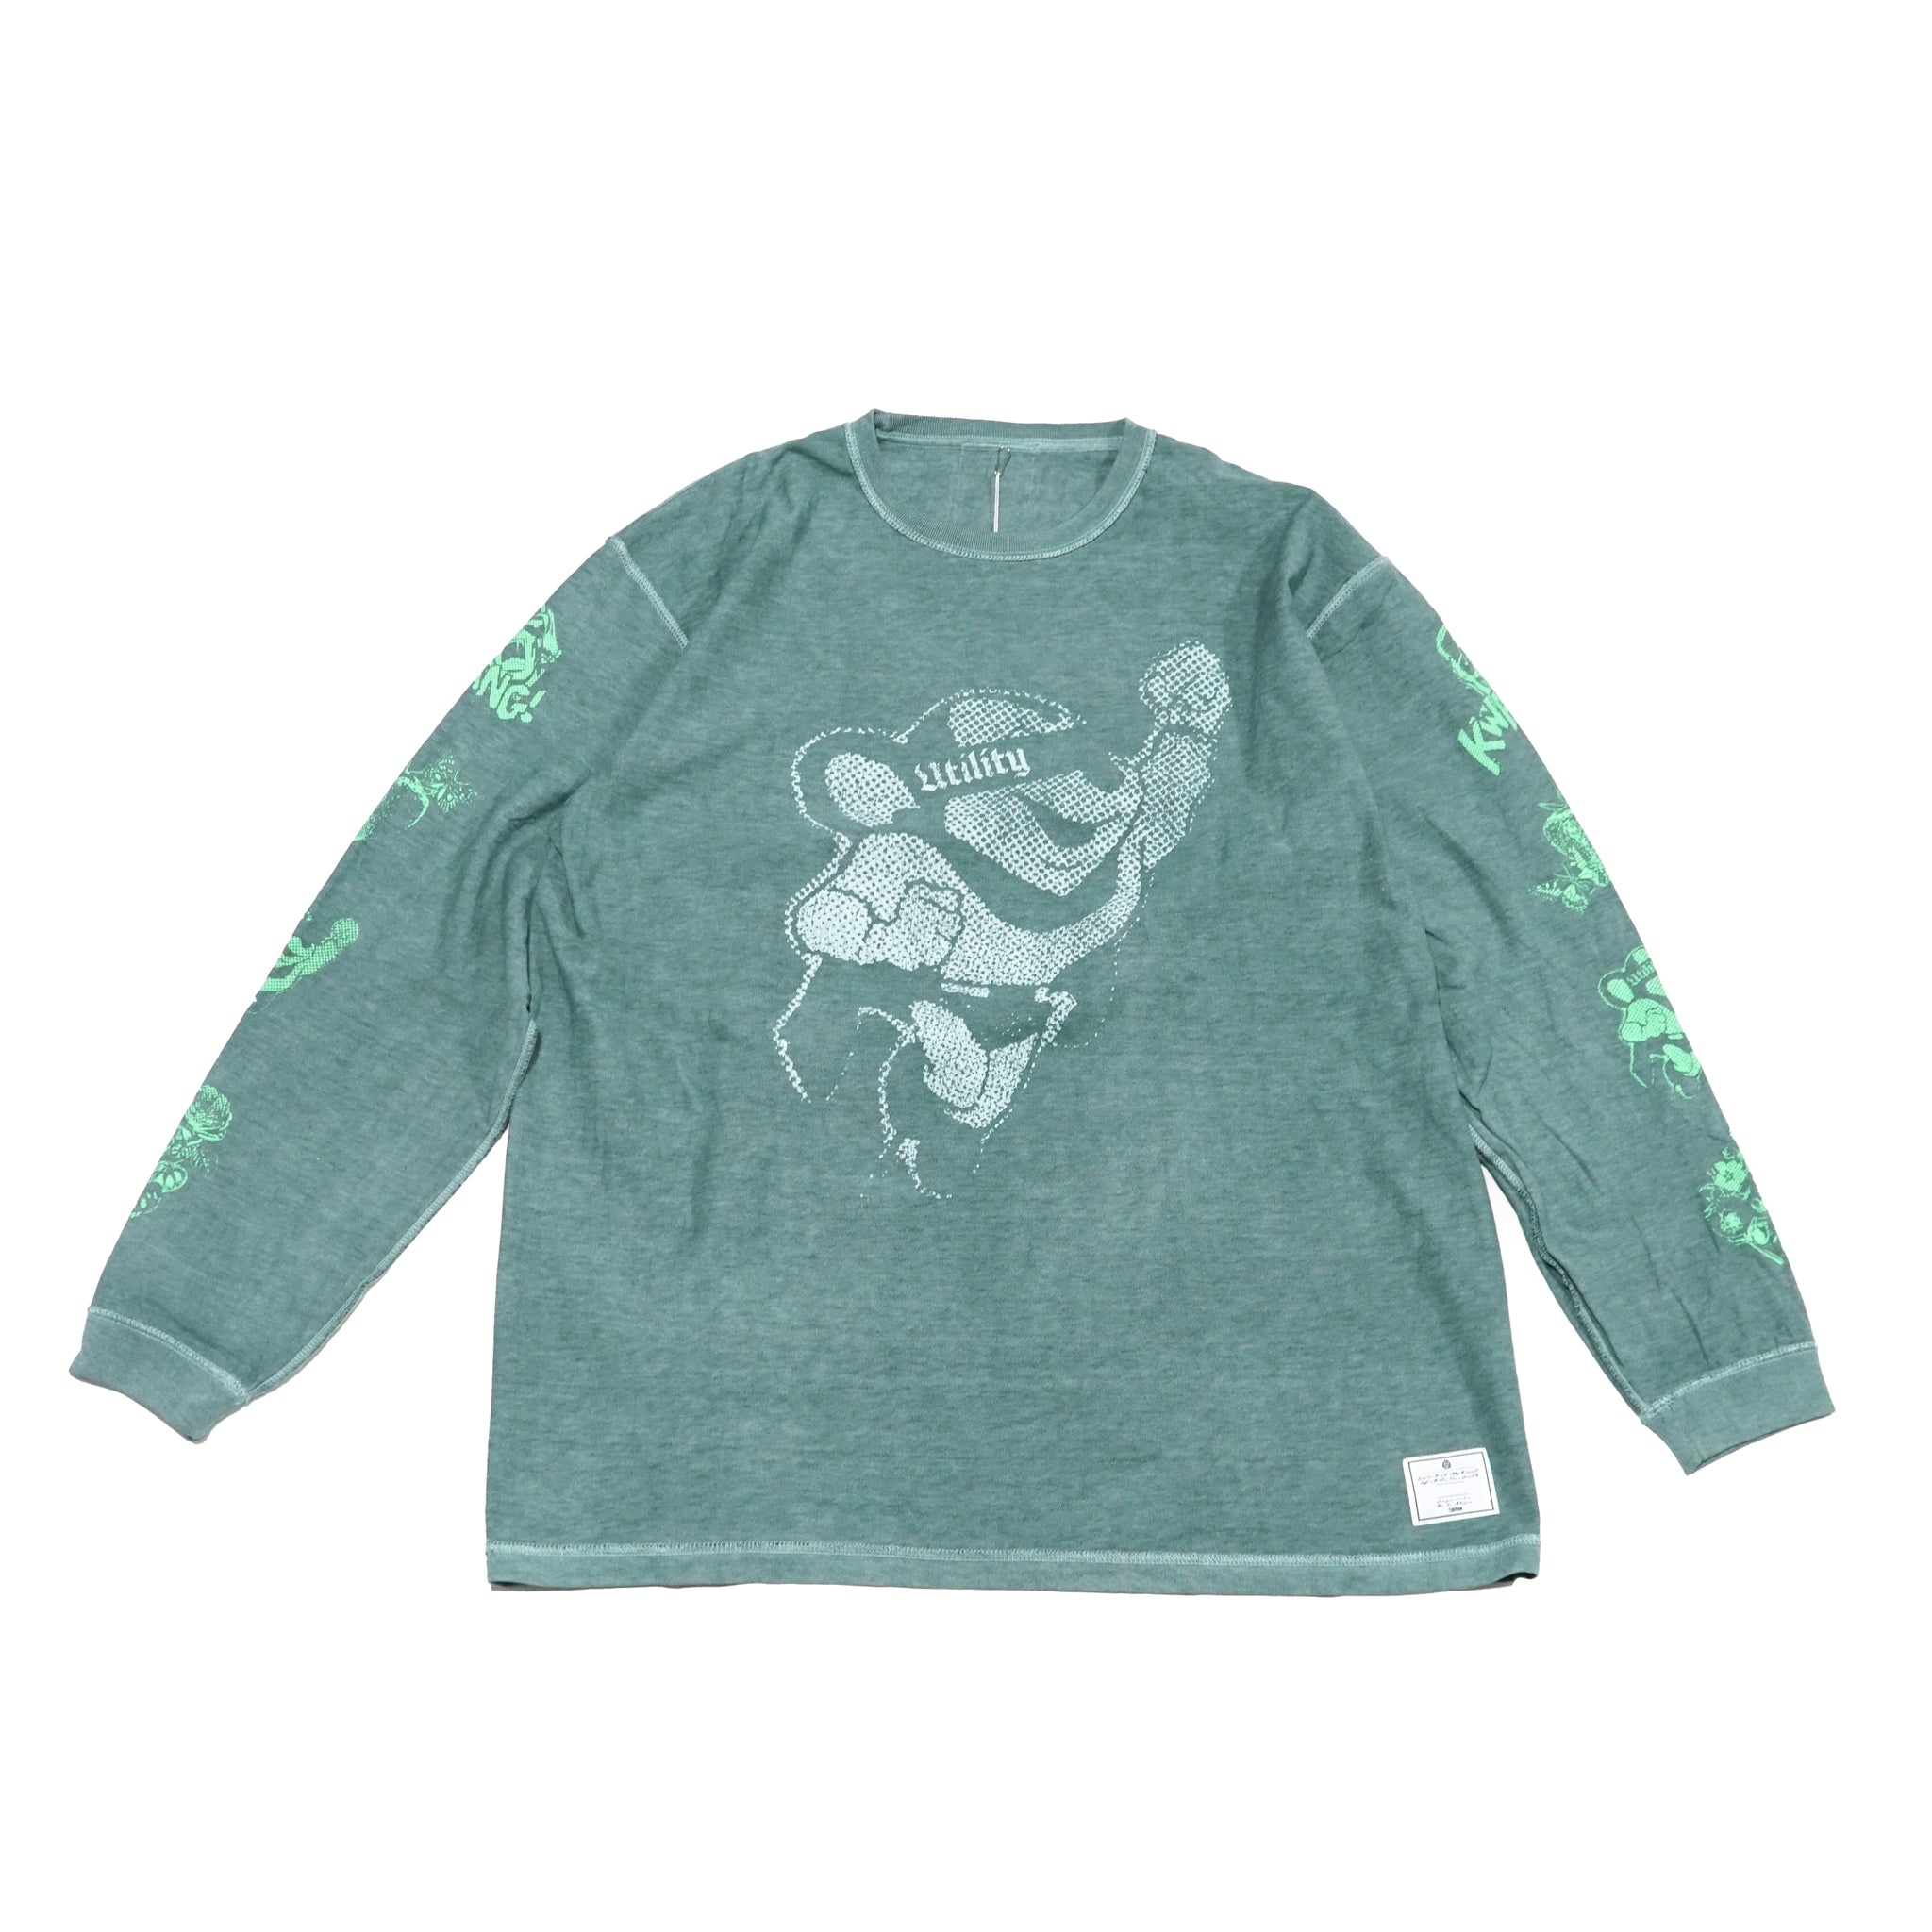 No:ef12-02 | Name:utility「12」anniversary character’s L/S | Color:Sumi/DyeGreen | Size:Free【EFFECTEN_エフェクテン】